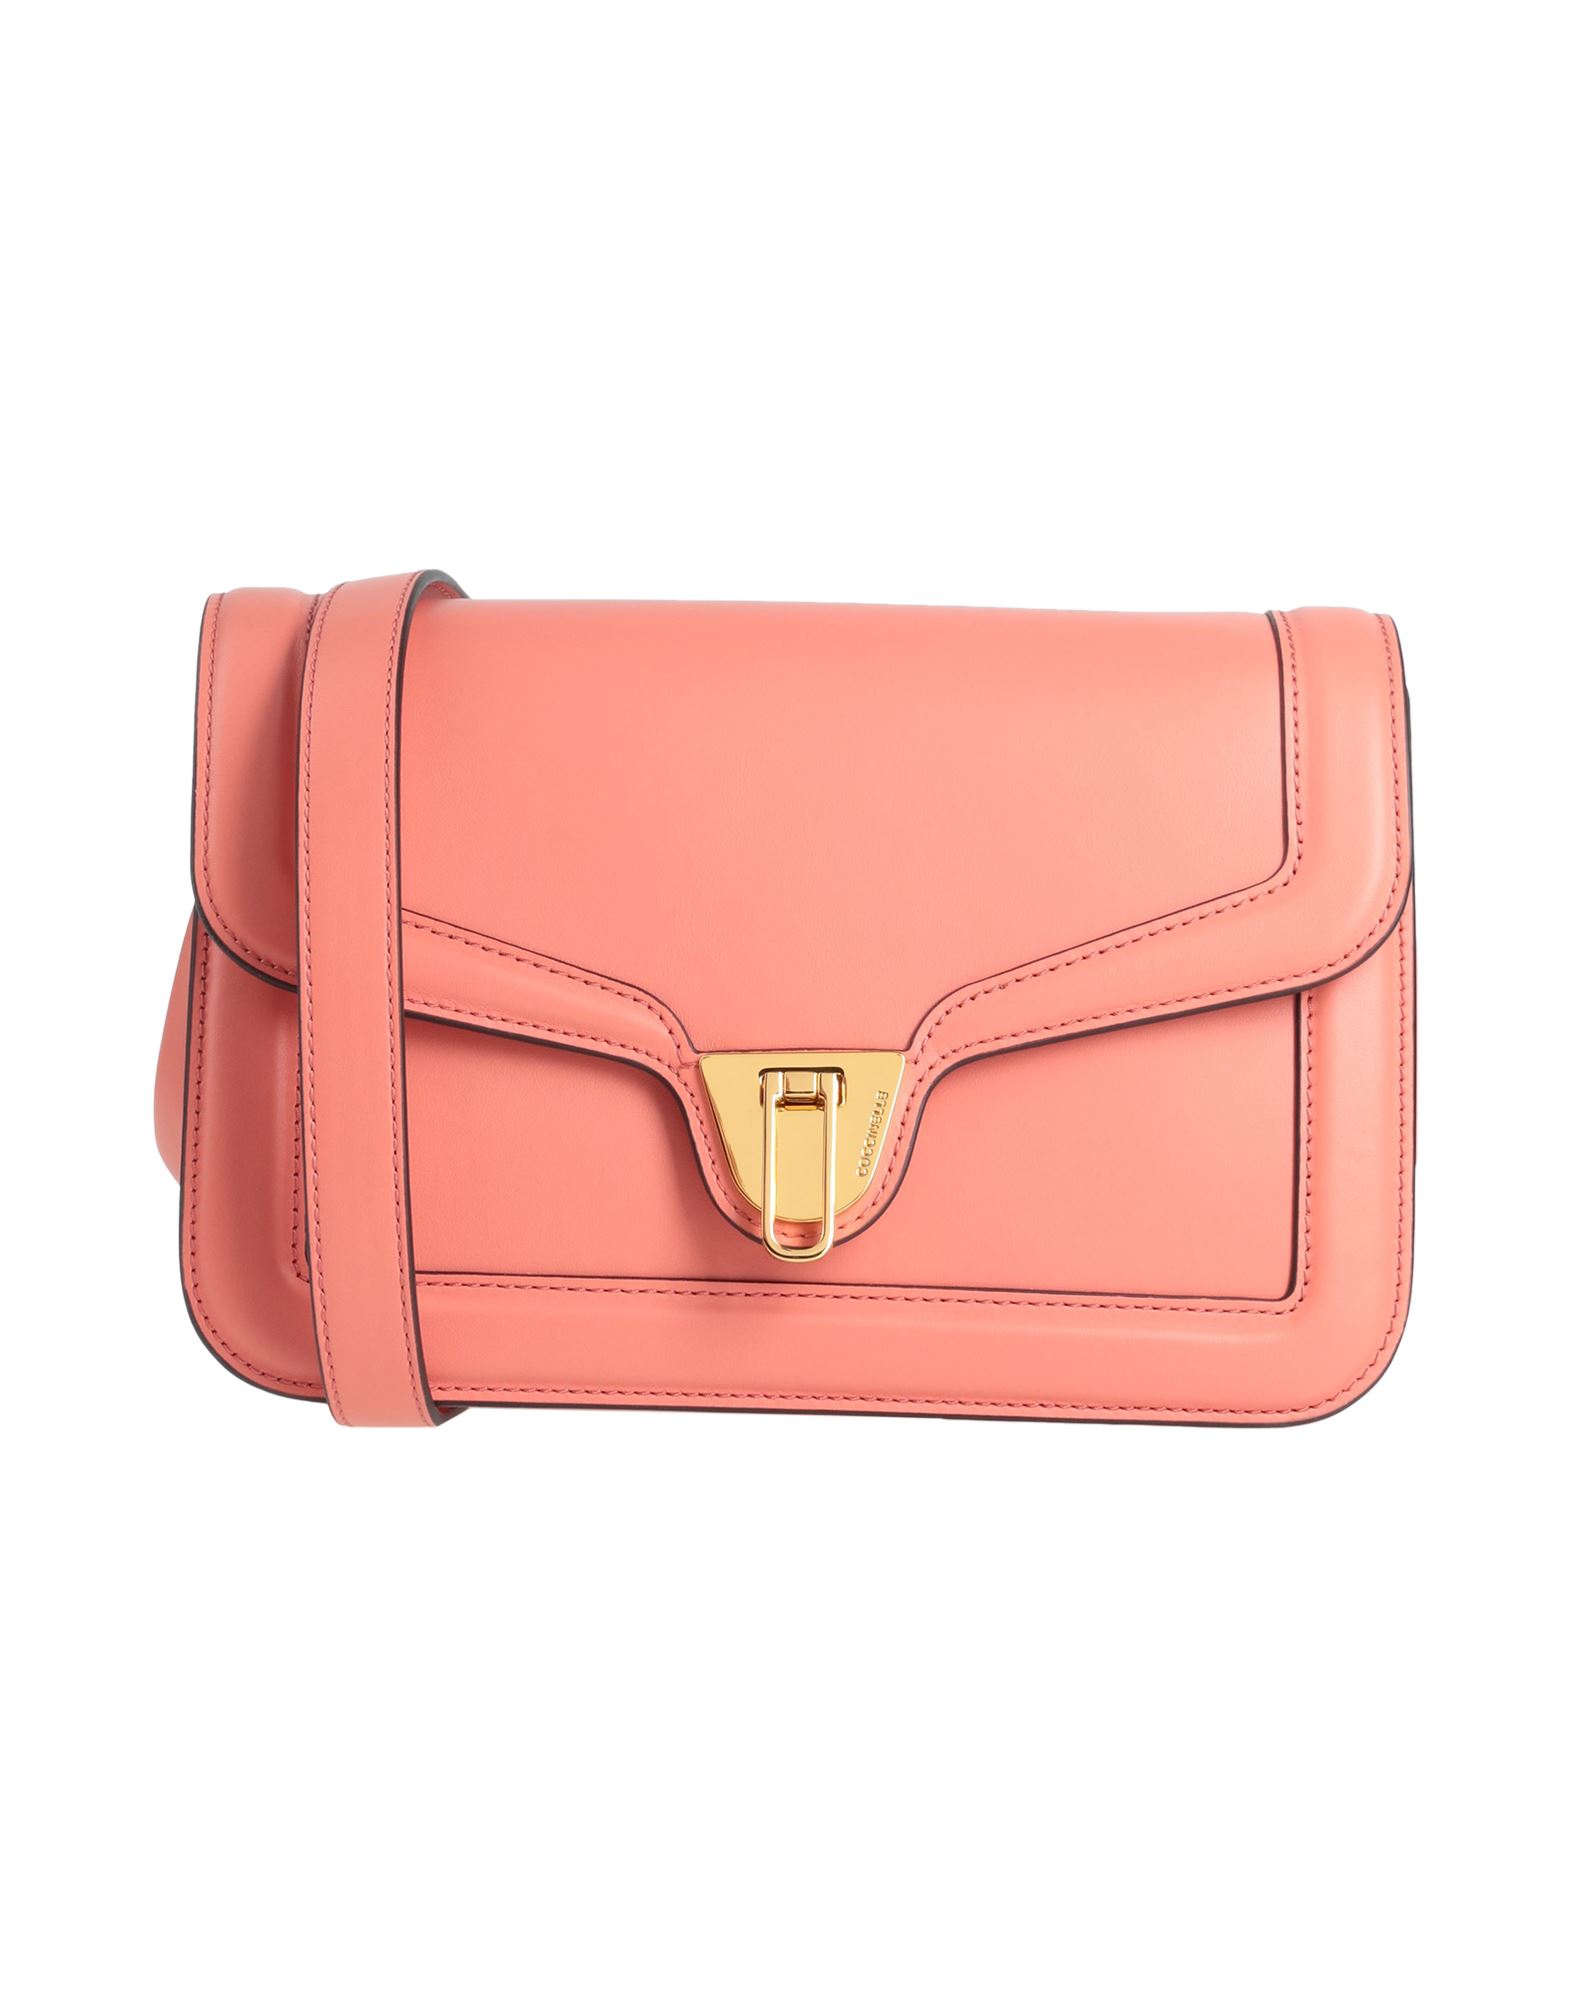 Coccinelle Handbags In Salmon Pink